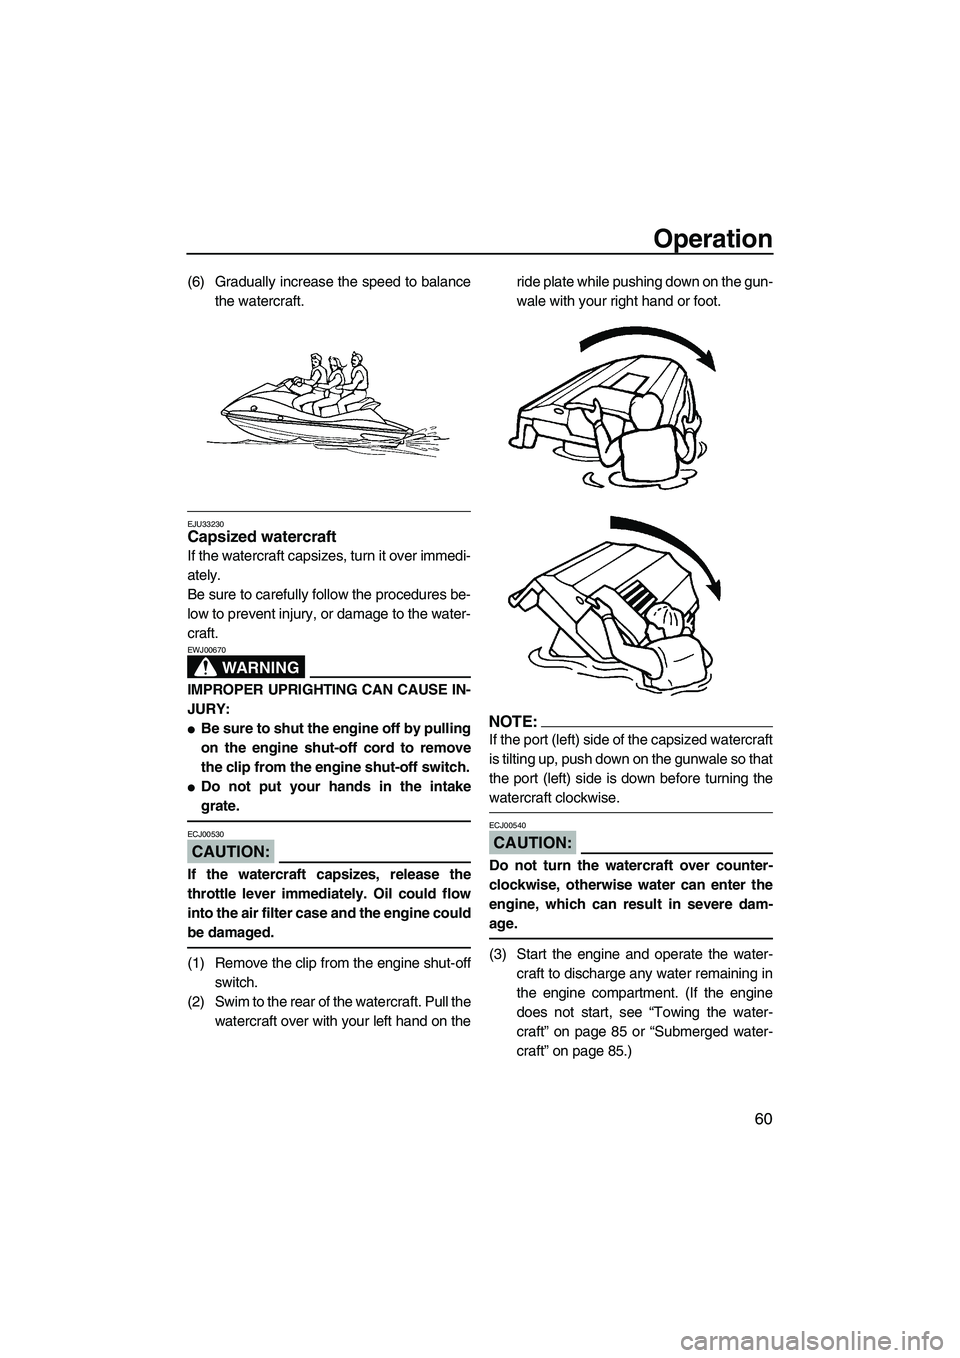 YAMAHA VX SPORT 2007  Owners Manual Operation
60
(6) Gradually increase the speed to balance
the watercraft.
EJU33230Capsized watercraft 
If the watercraft capsizes, turn it over immedi-
ately.
Be sure to carefully follow the procedures